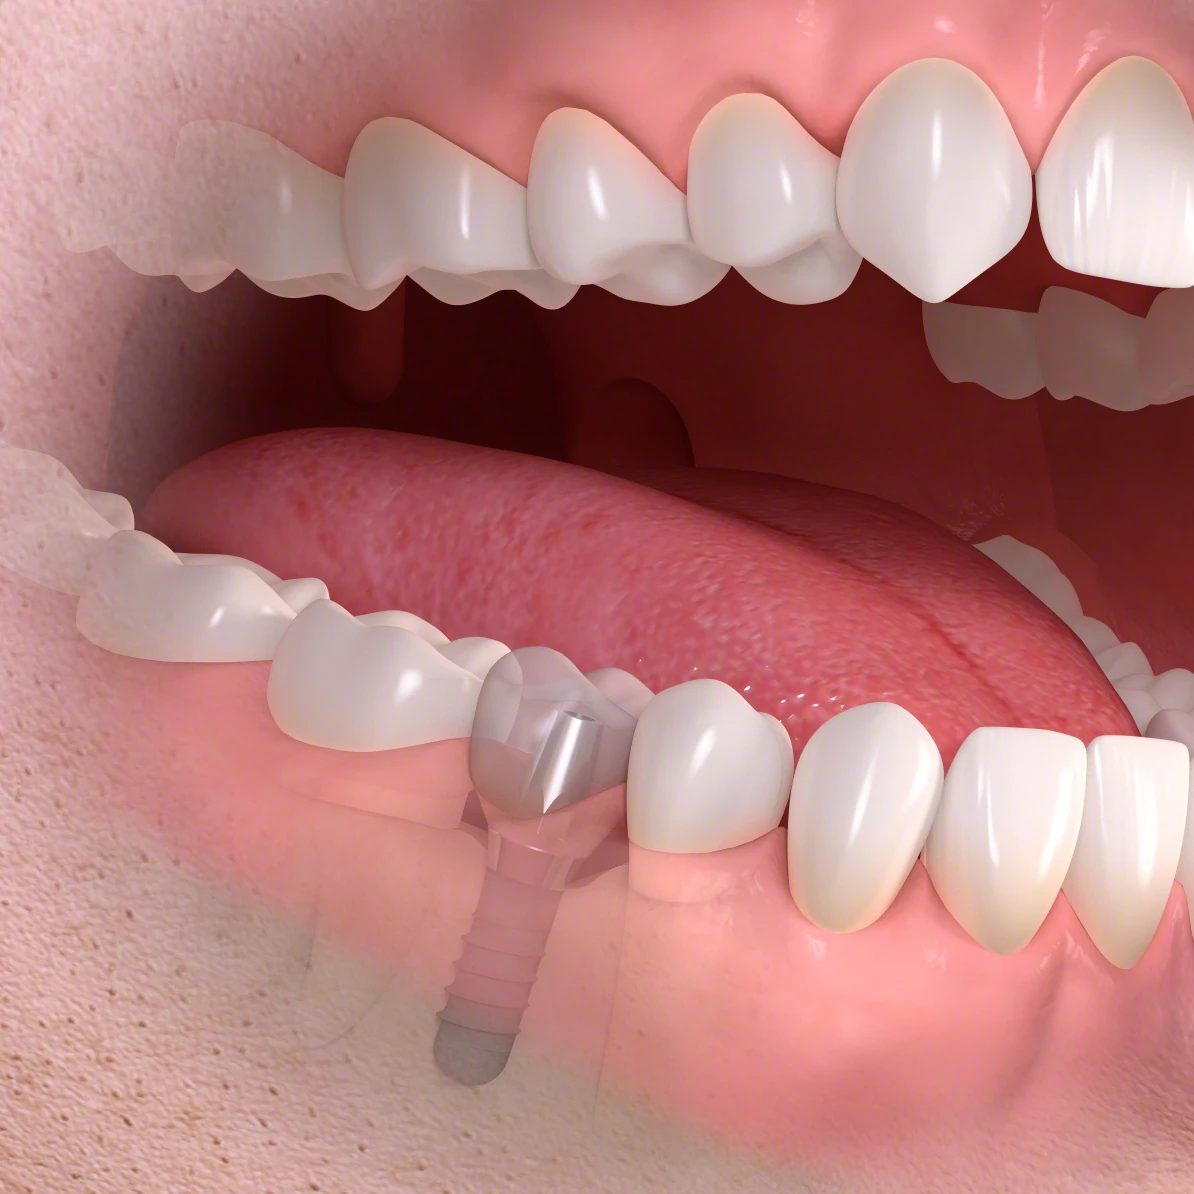 Stock image of a single tooth implant